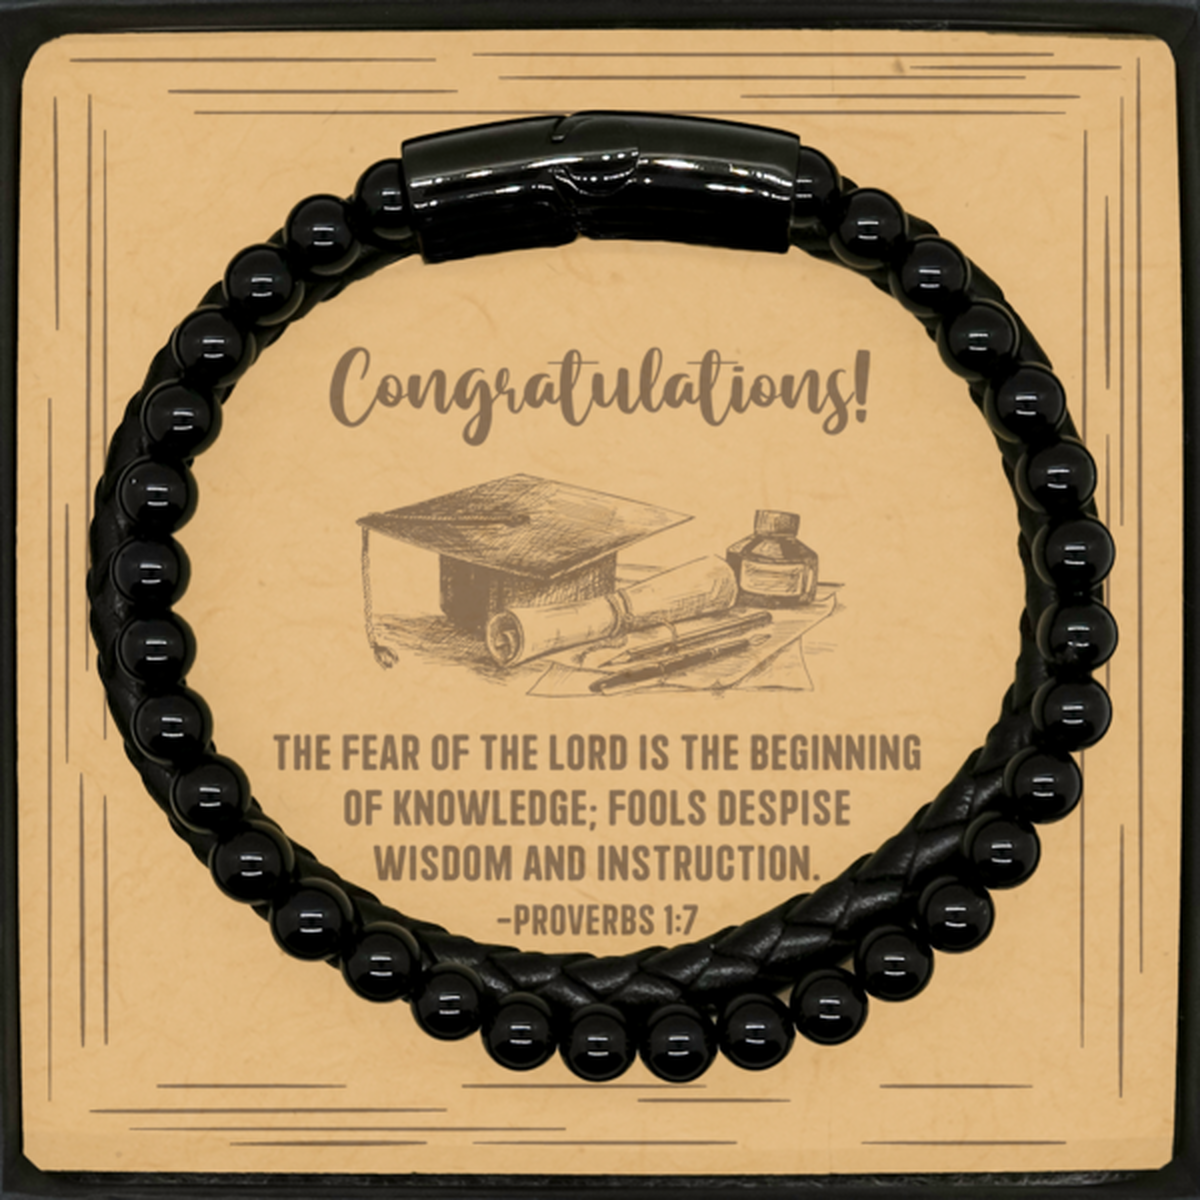 Religious Graduation Cards, The fear of the Lord is the beginning of knowledge, Bible Verse Stone Leather Bracelet, Christian Graduation Gifts